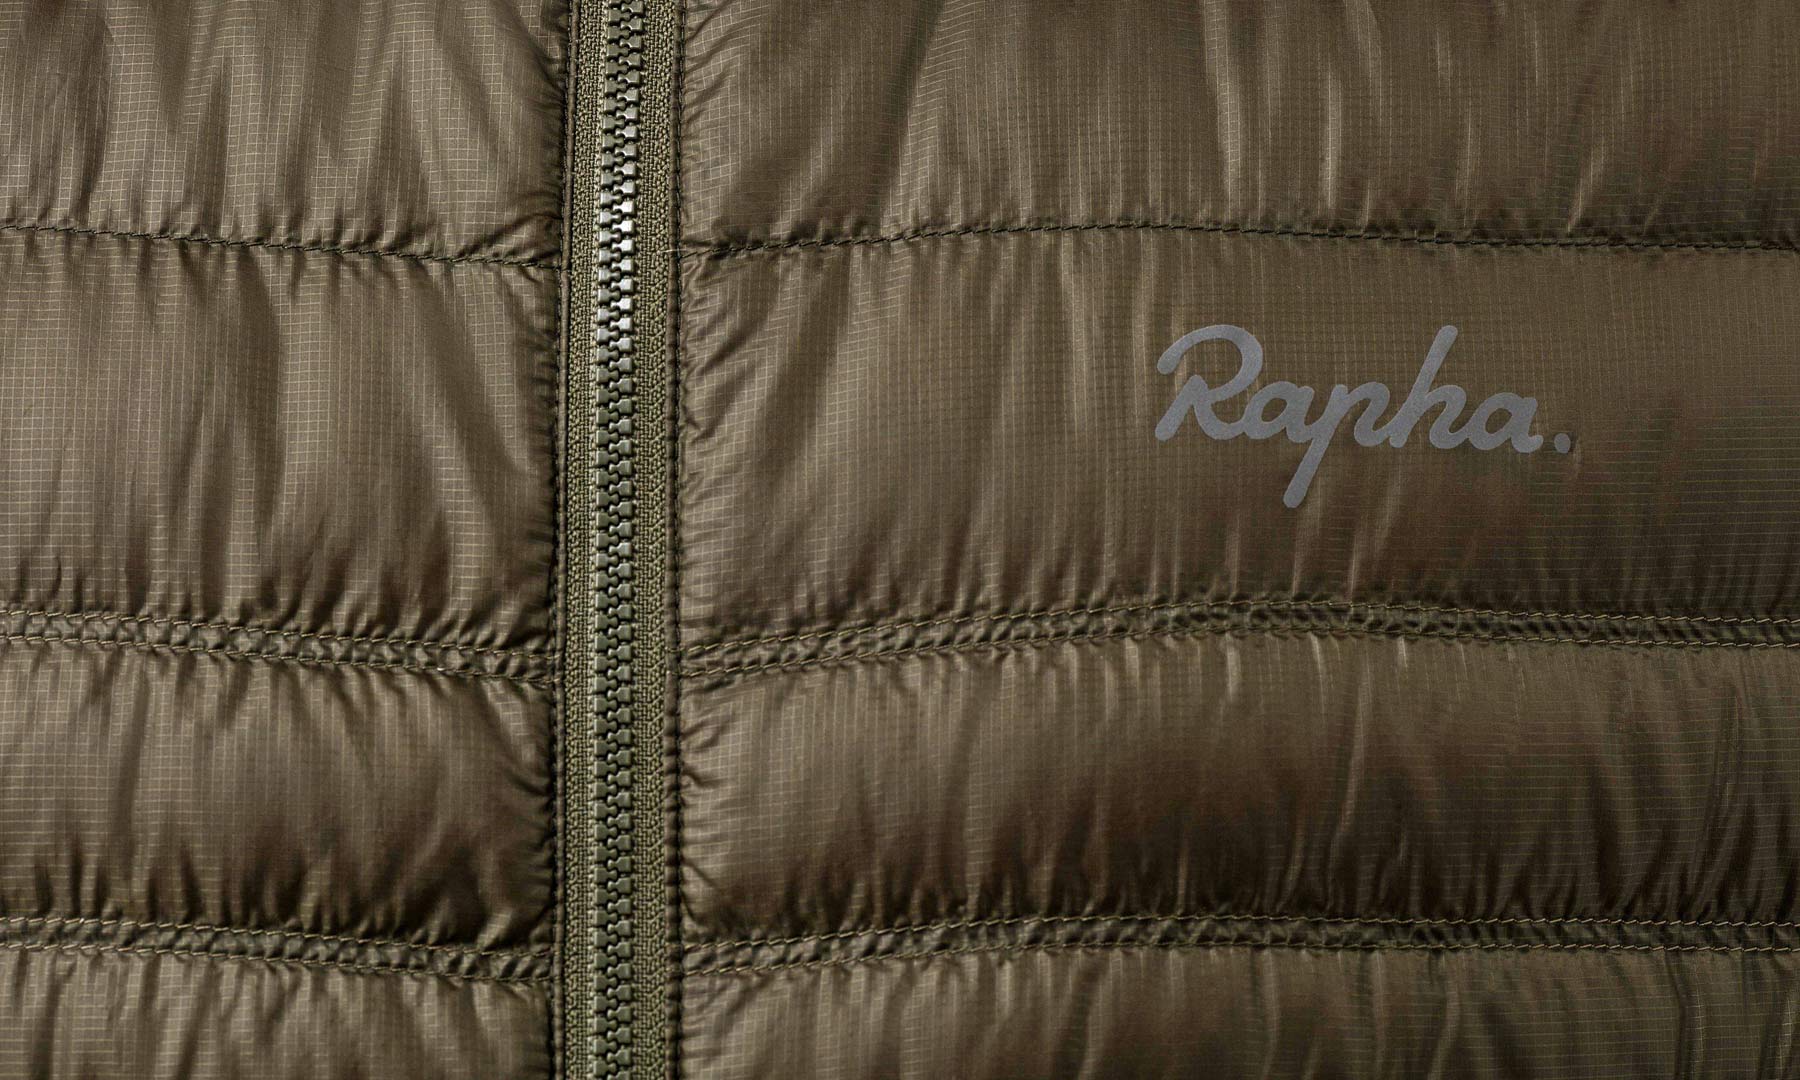 Rapha teases gravel & adventure specific sleeping bag, plus much more!